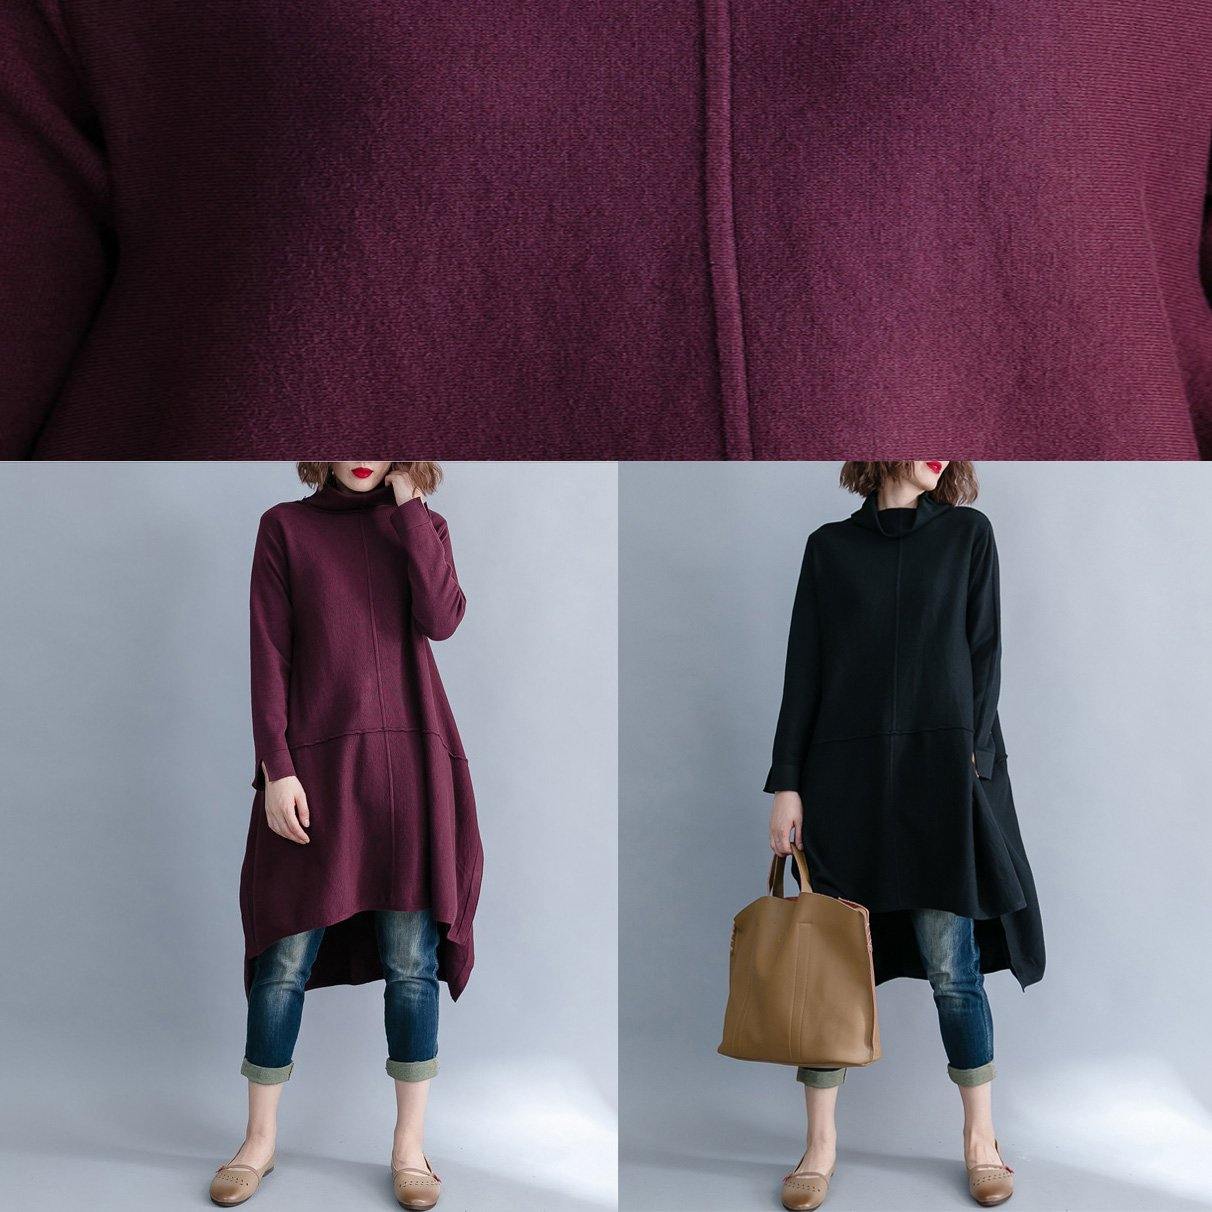 Christmas high neck Sweater dress outfit Beautiful burgundy Big knit top side open - Omychic